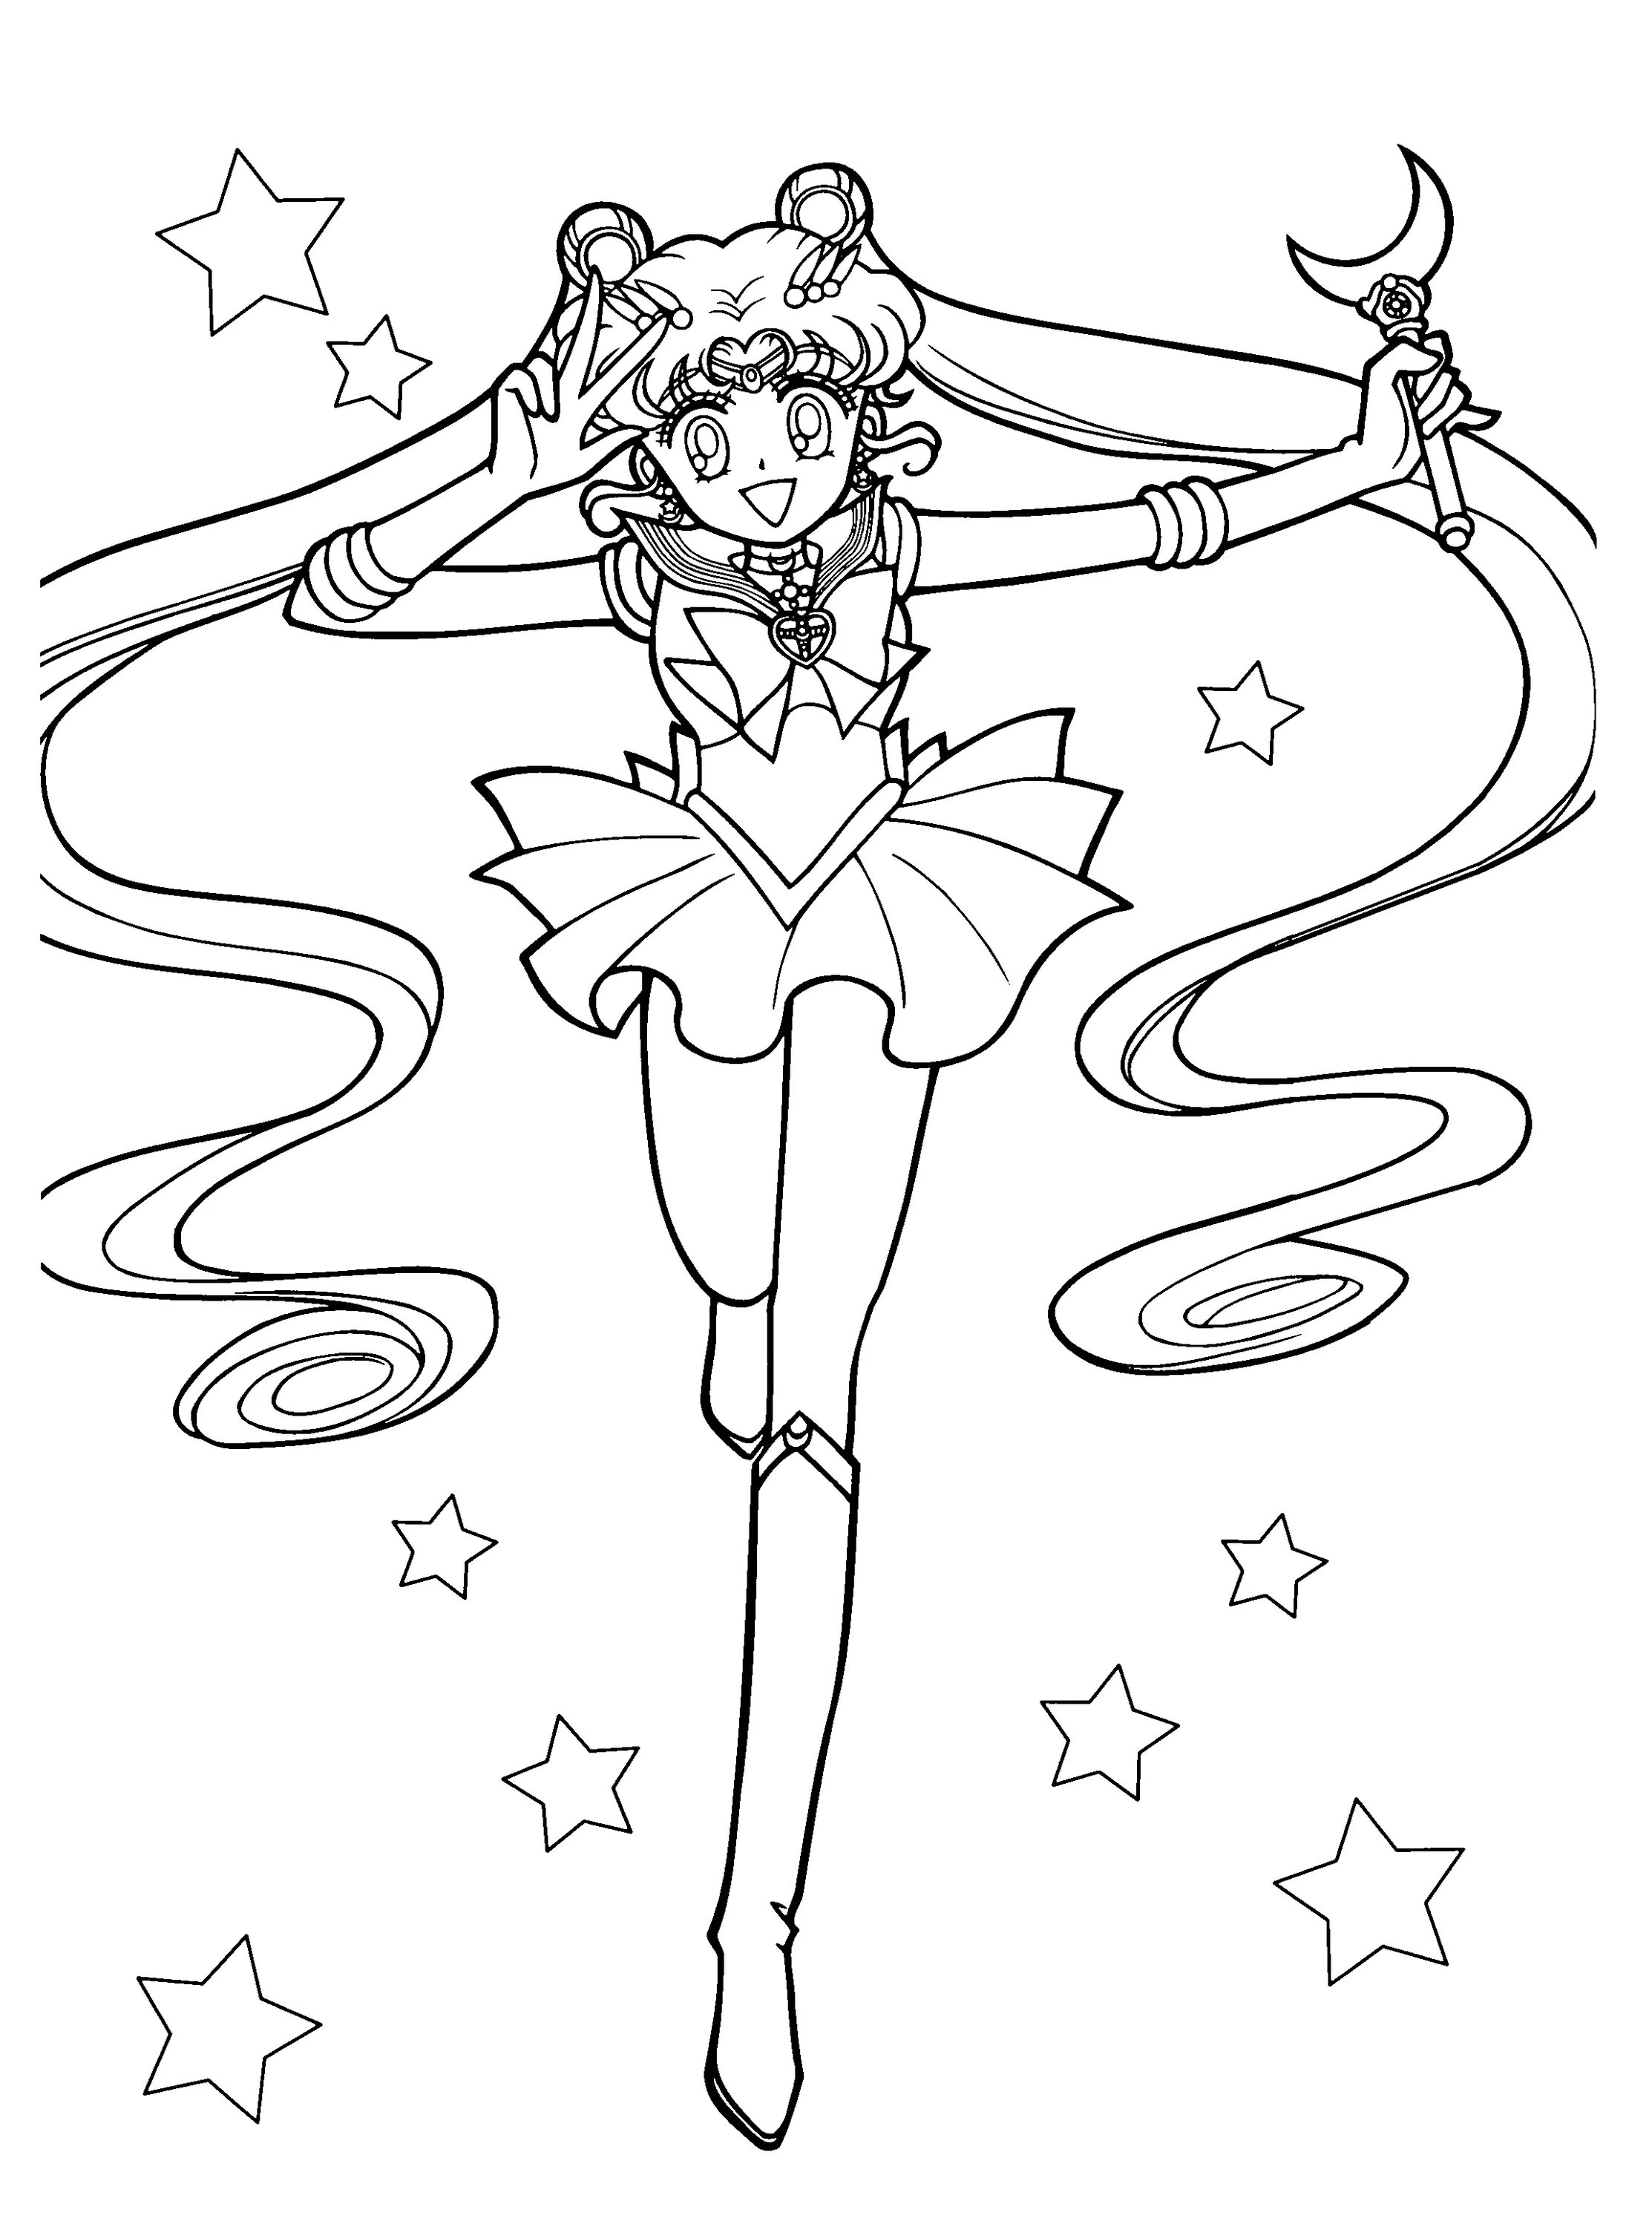 Refreshing coloring book for girls sailor moon